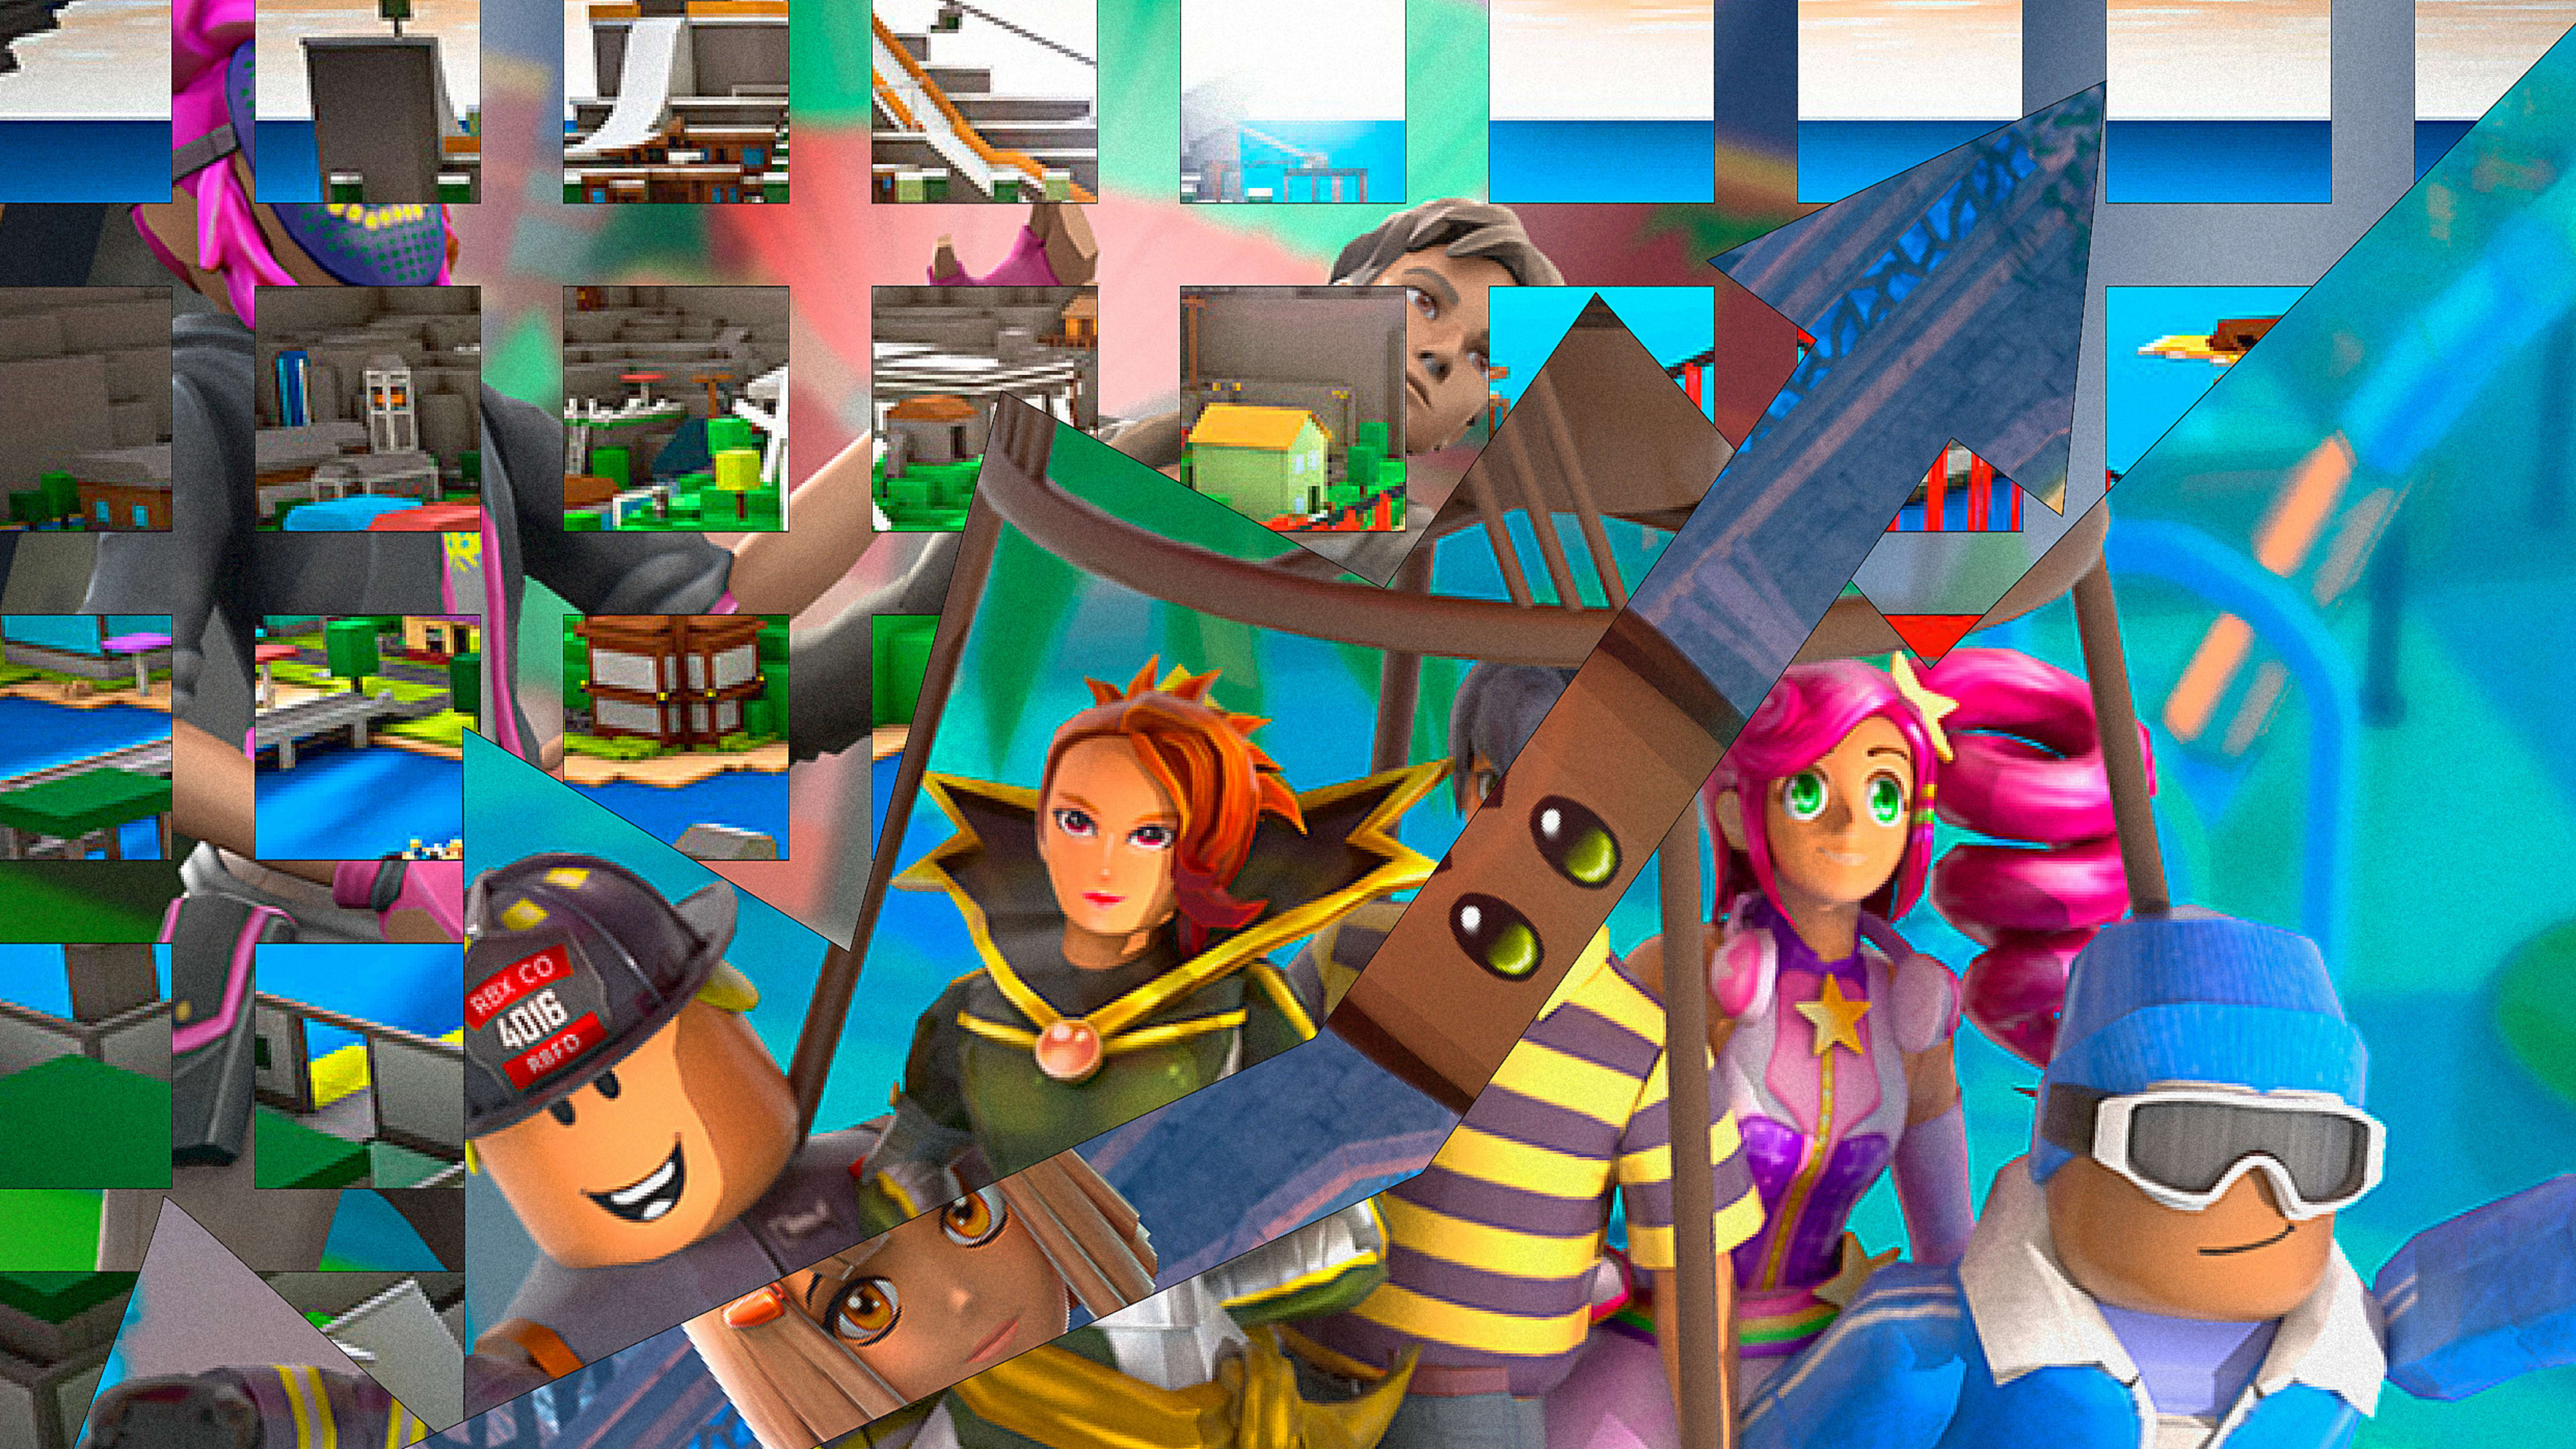 Roblox stock skyrockets after metrics report shows boost in daily active users